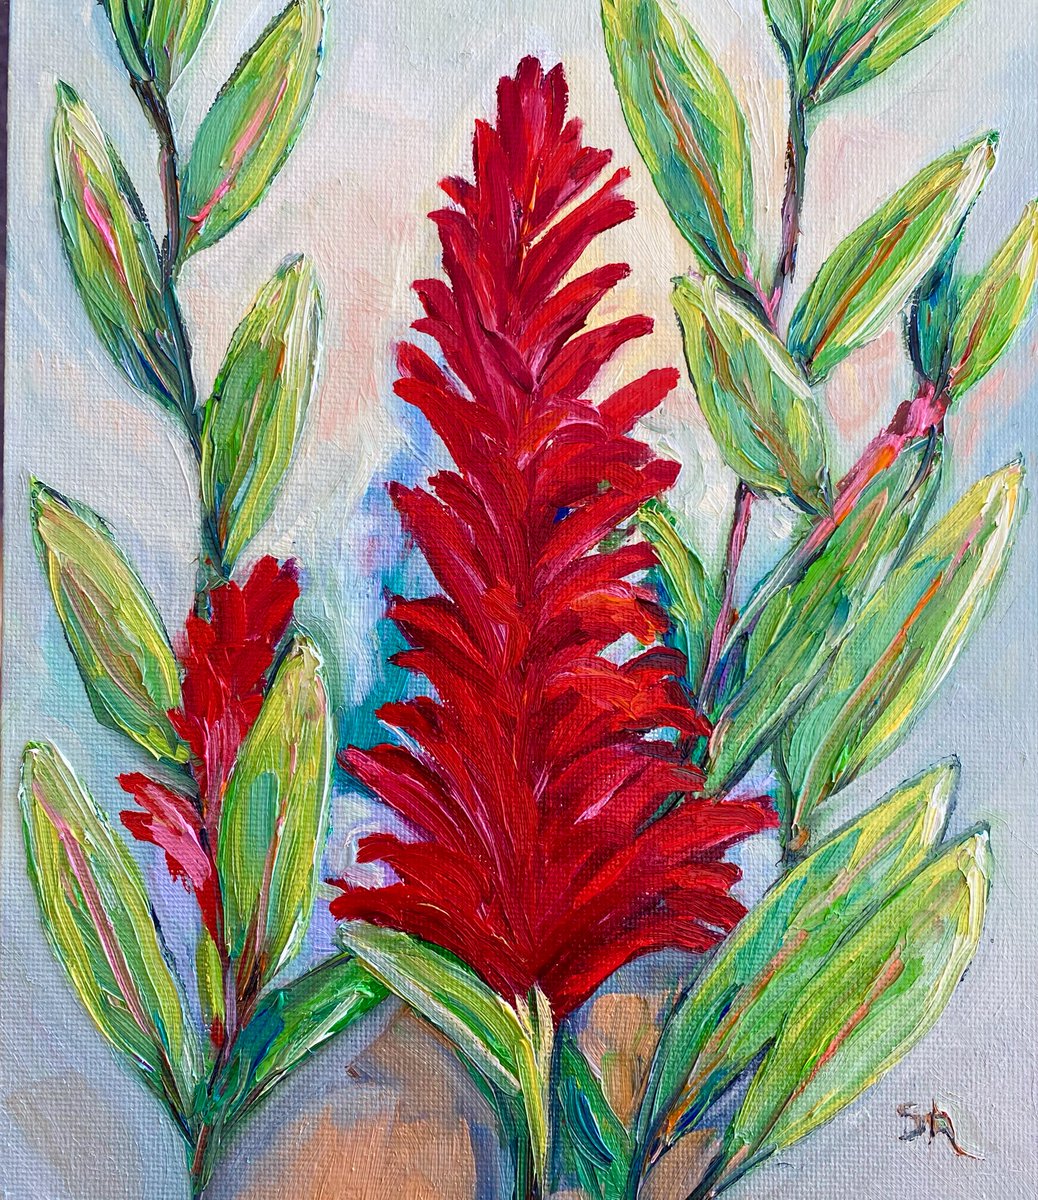 Working on a few small paintings for an event.  #redginger #art #ArtistOnTwitter #artonx #red #flower #paintings #wednesdayvibes #haveagoodday